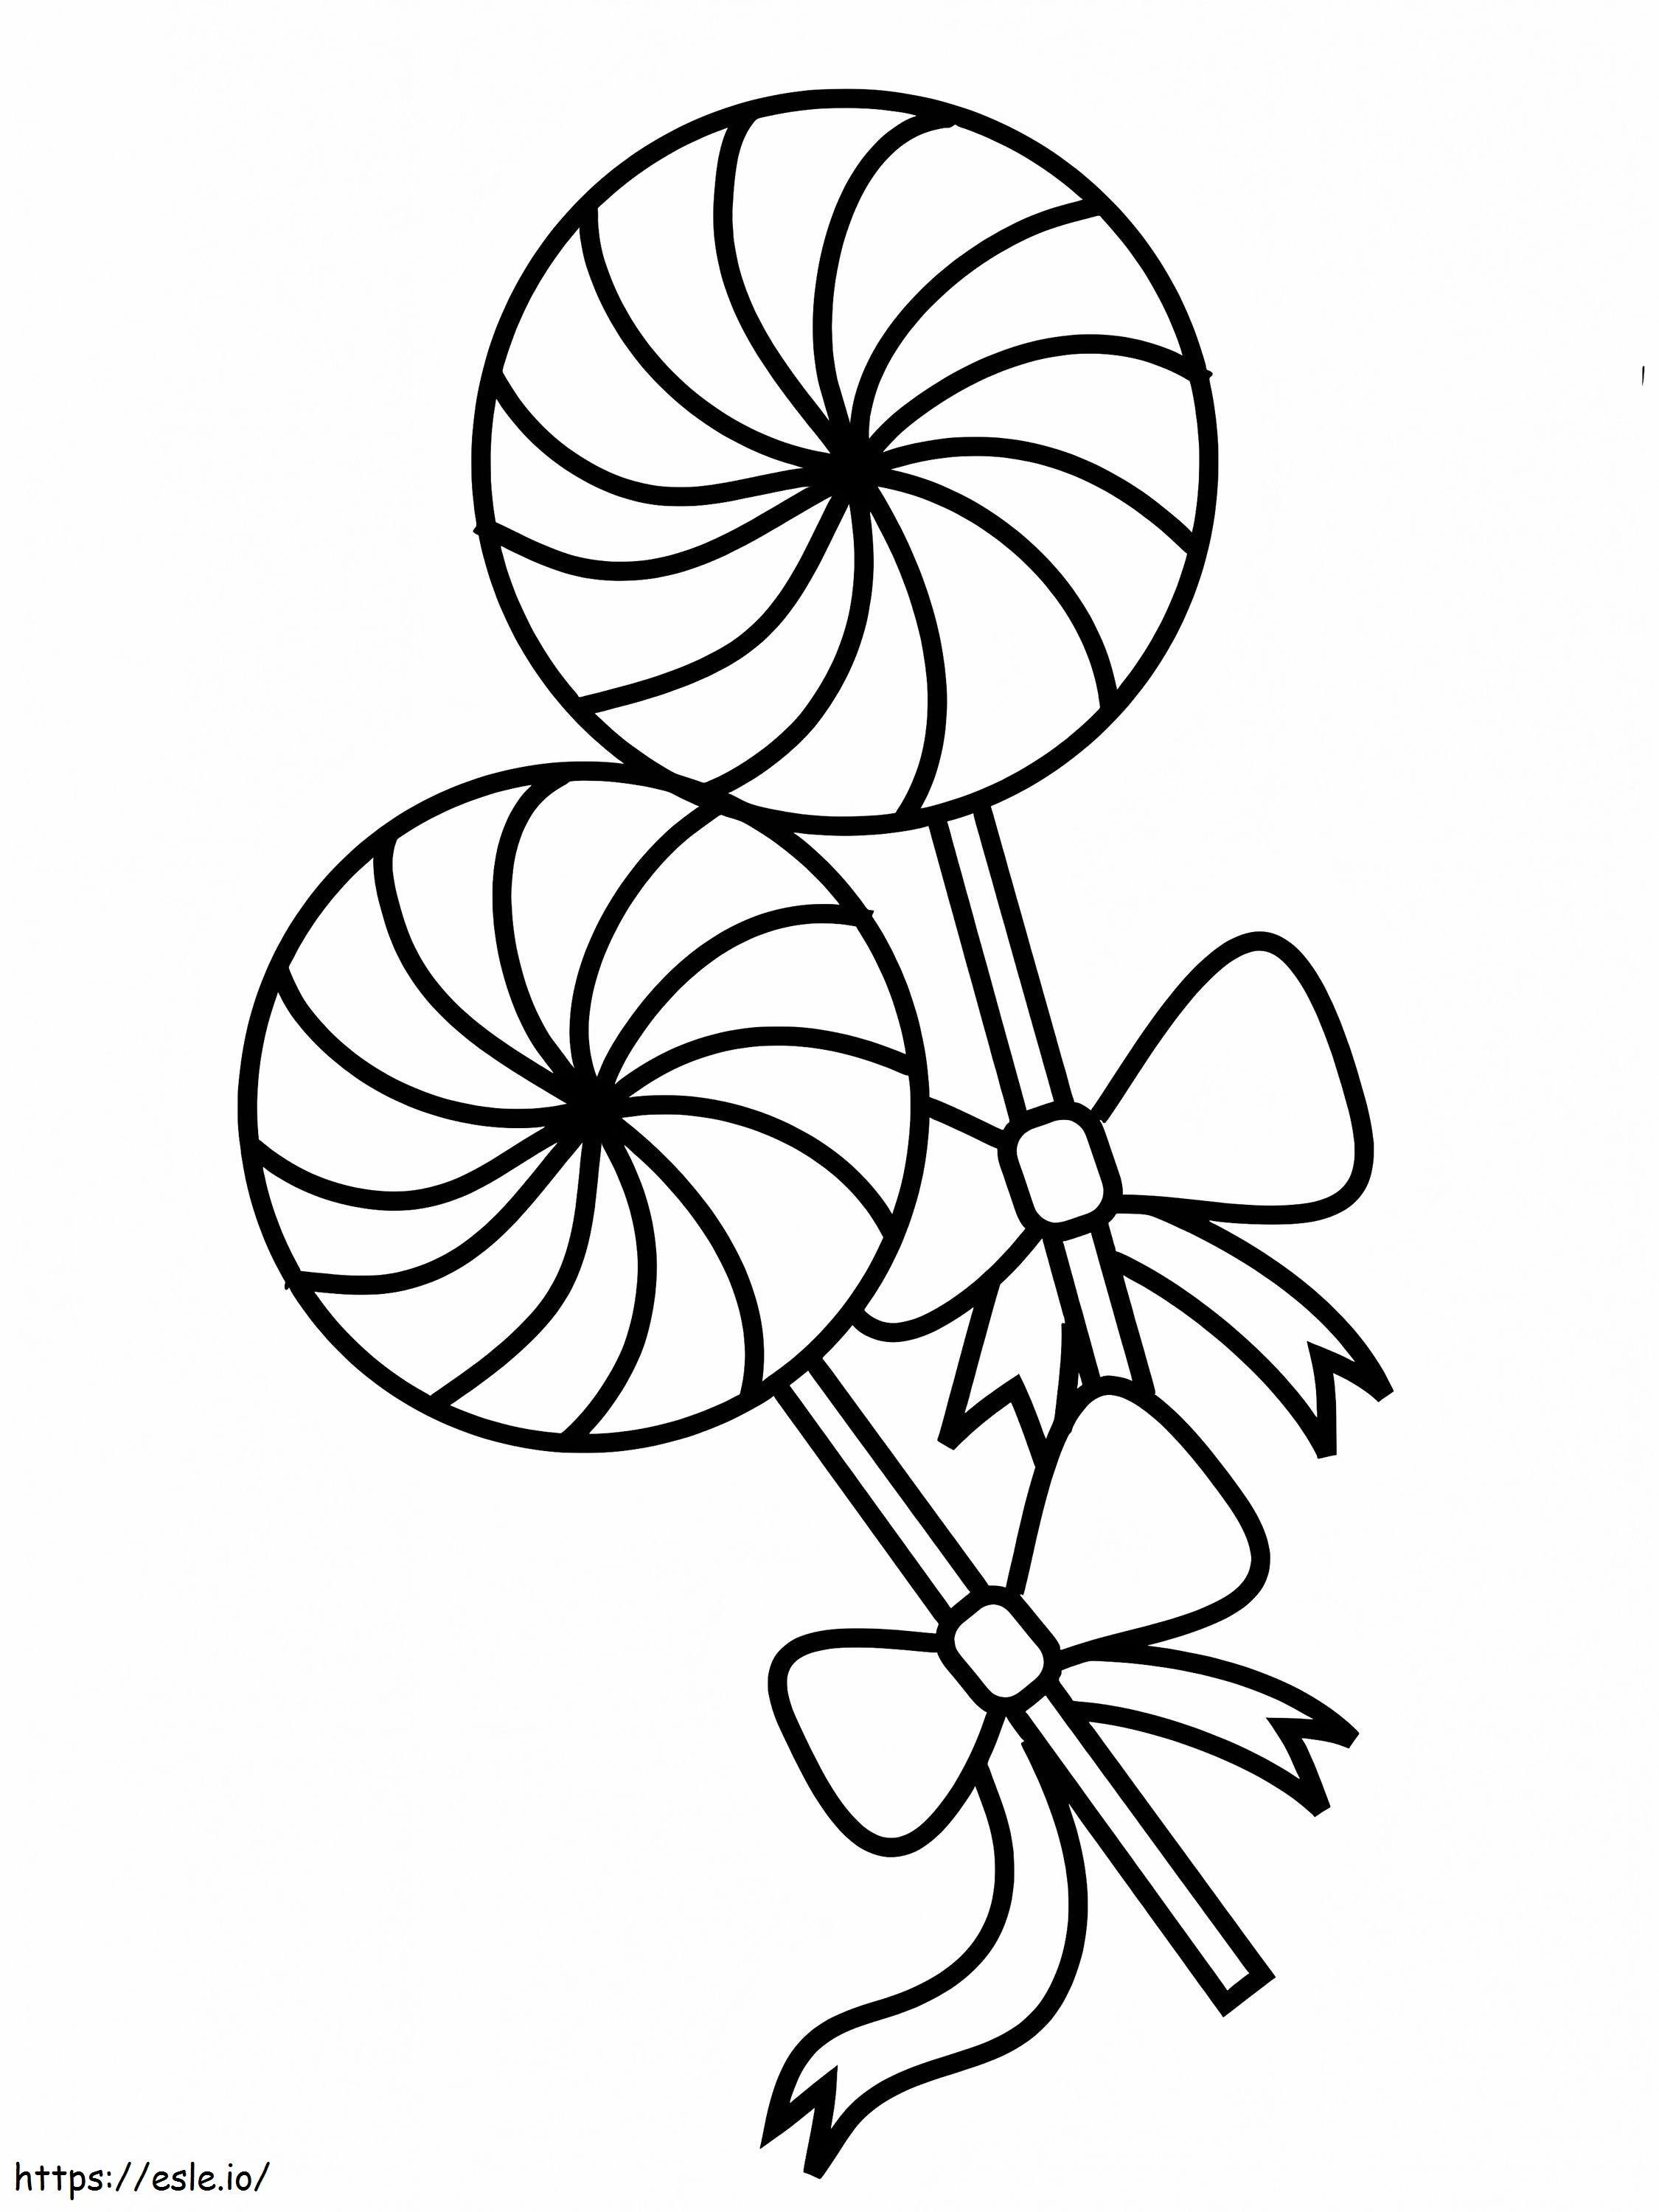 Two Lollipops coloring page